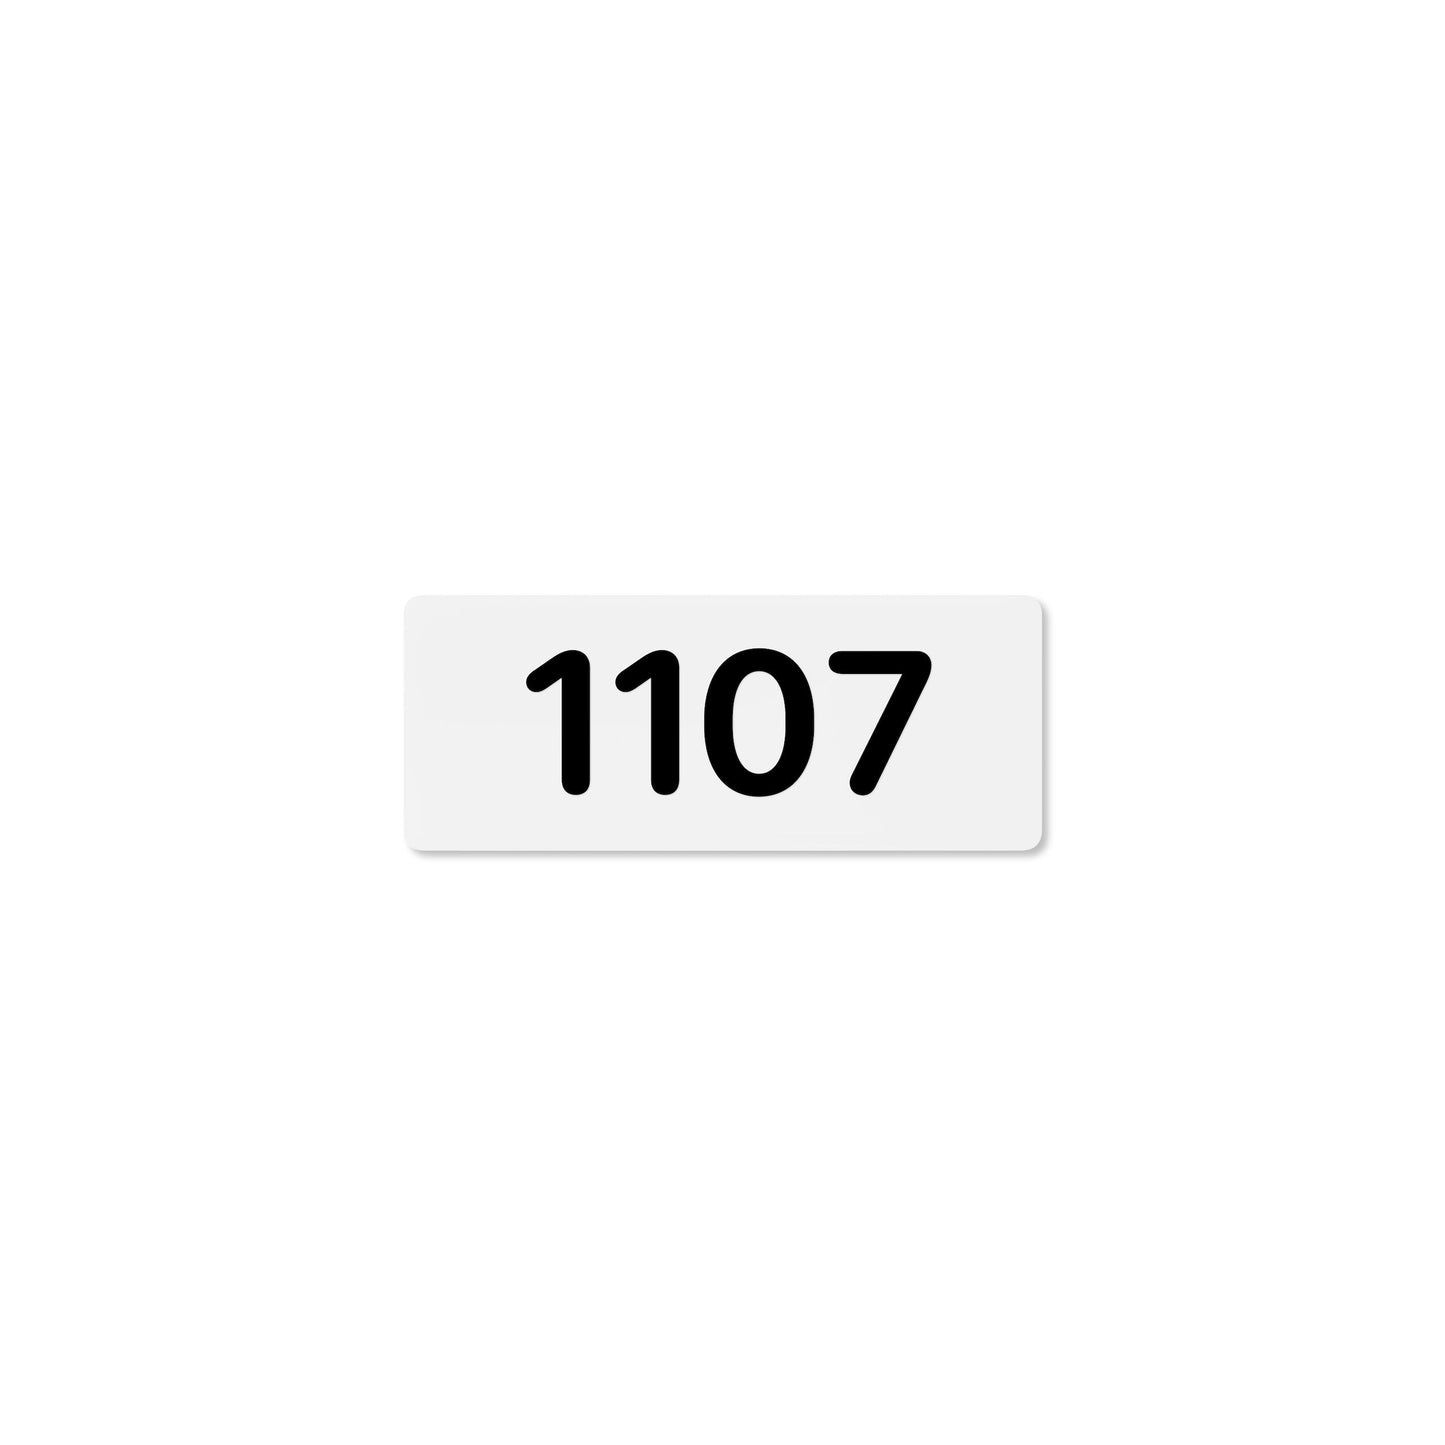 Numeral 1107